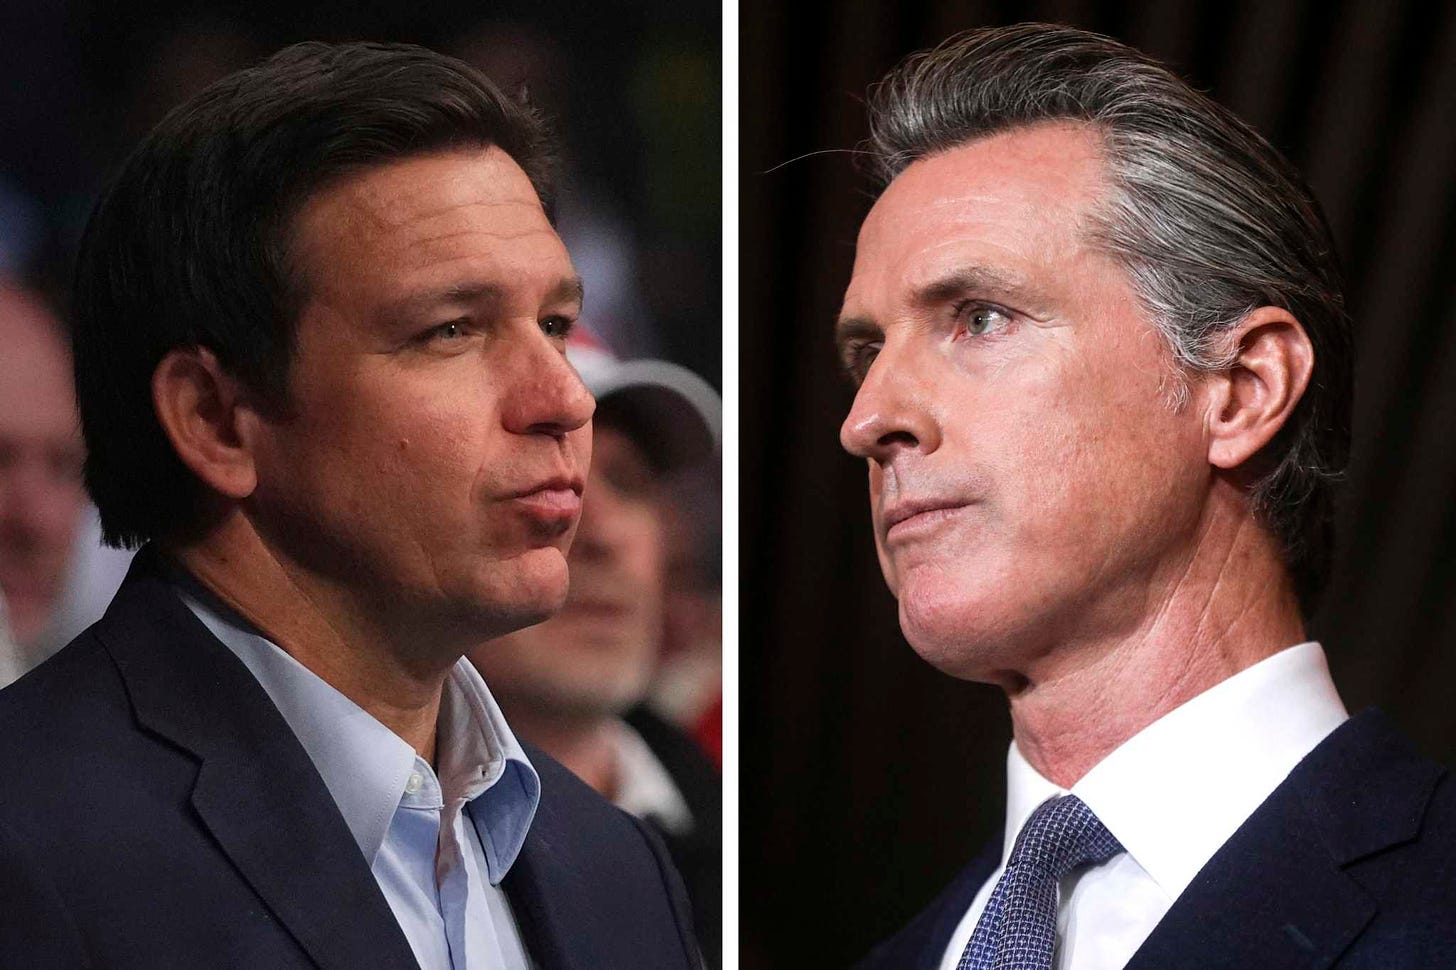 Ron DeSantis' feud with Gavin Newsom ramps up amid San Francisco 'dumpster  fire' insult